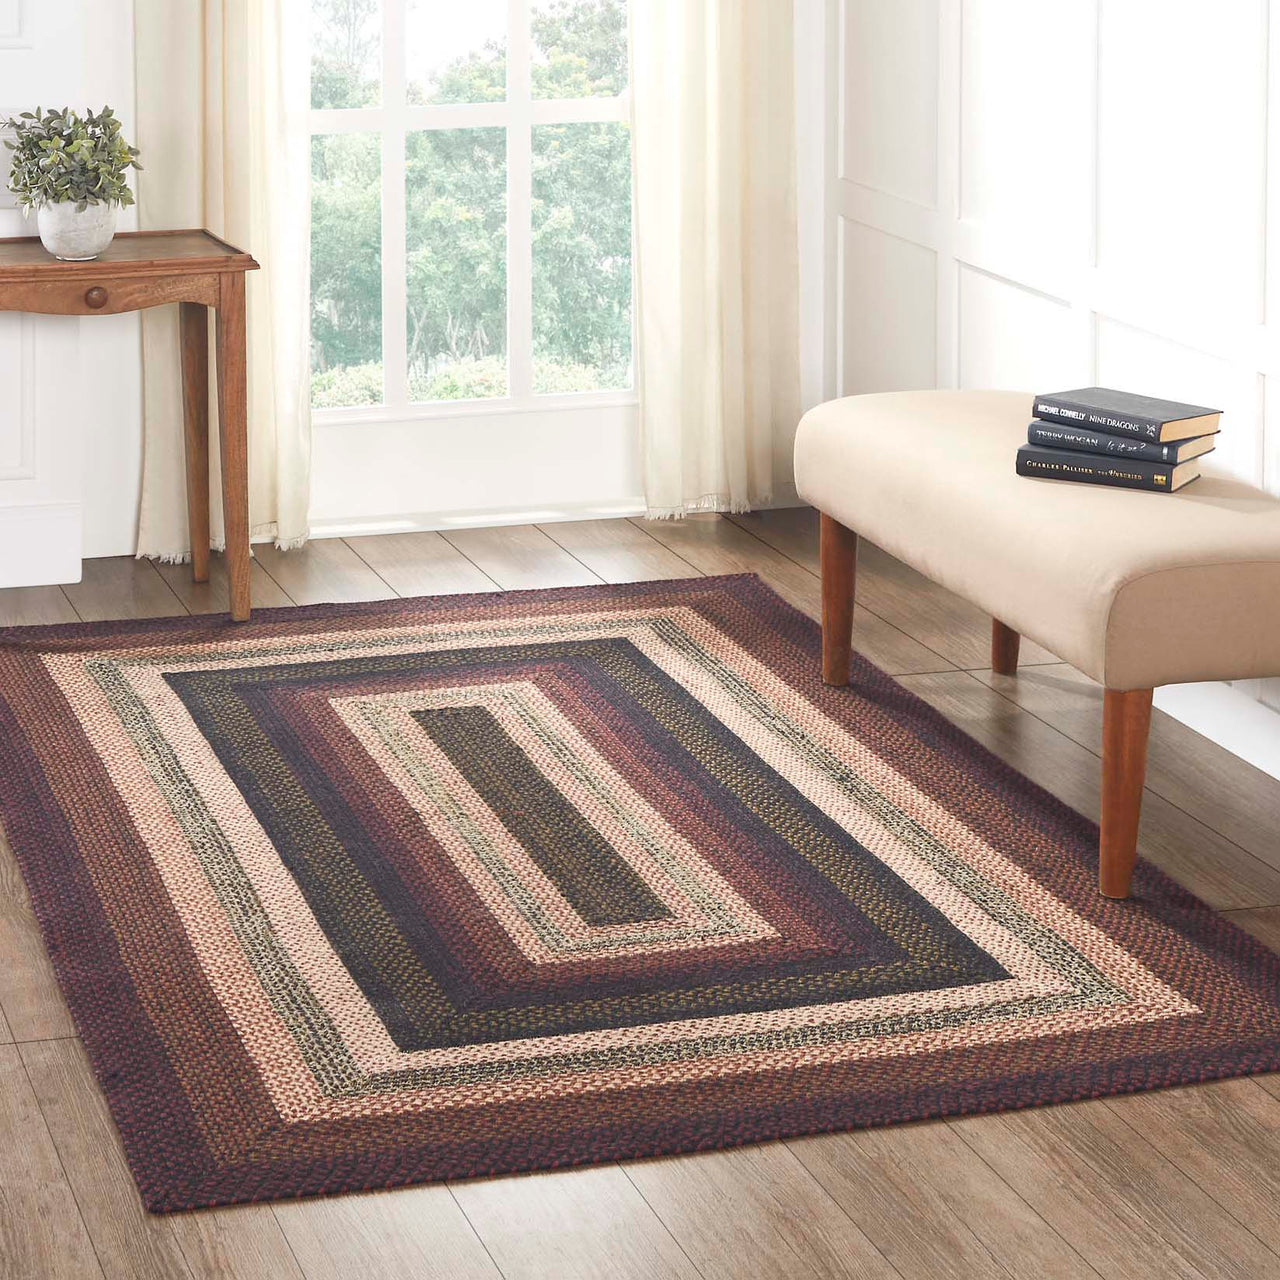 Beckham Jute Braided Rug Rect with Rug Pad 5'x8' VHC Brands